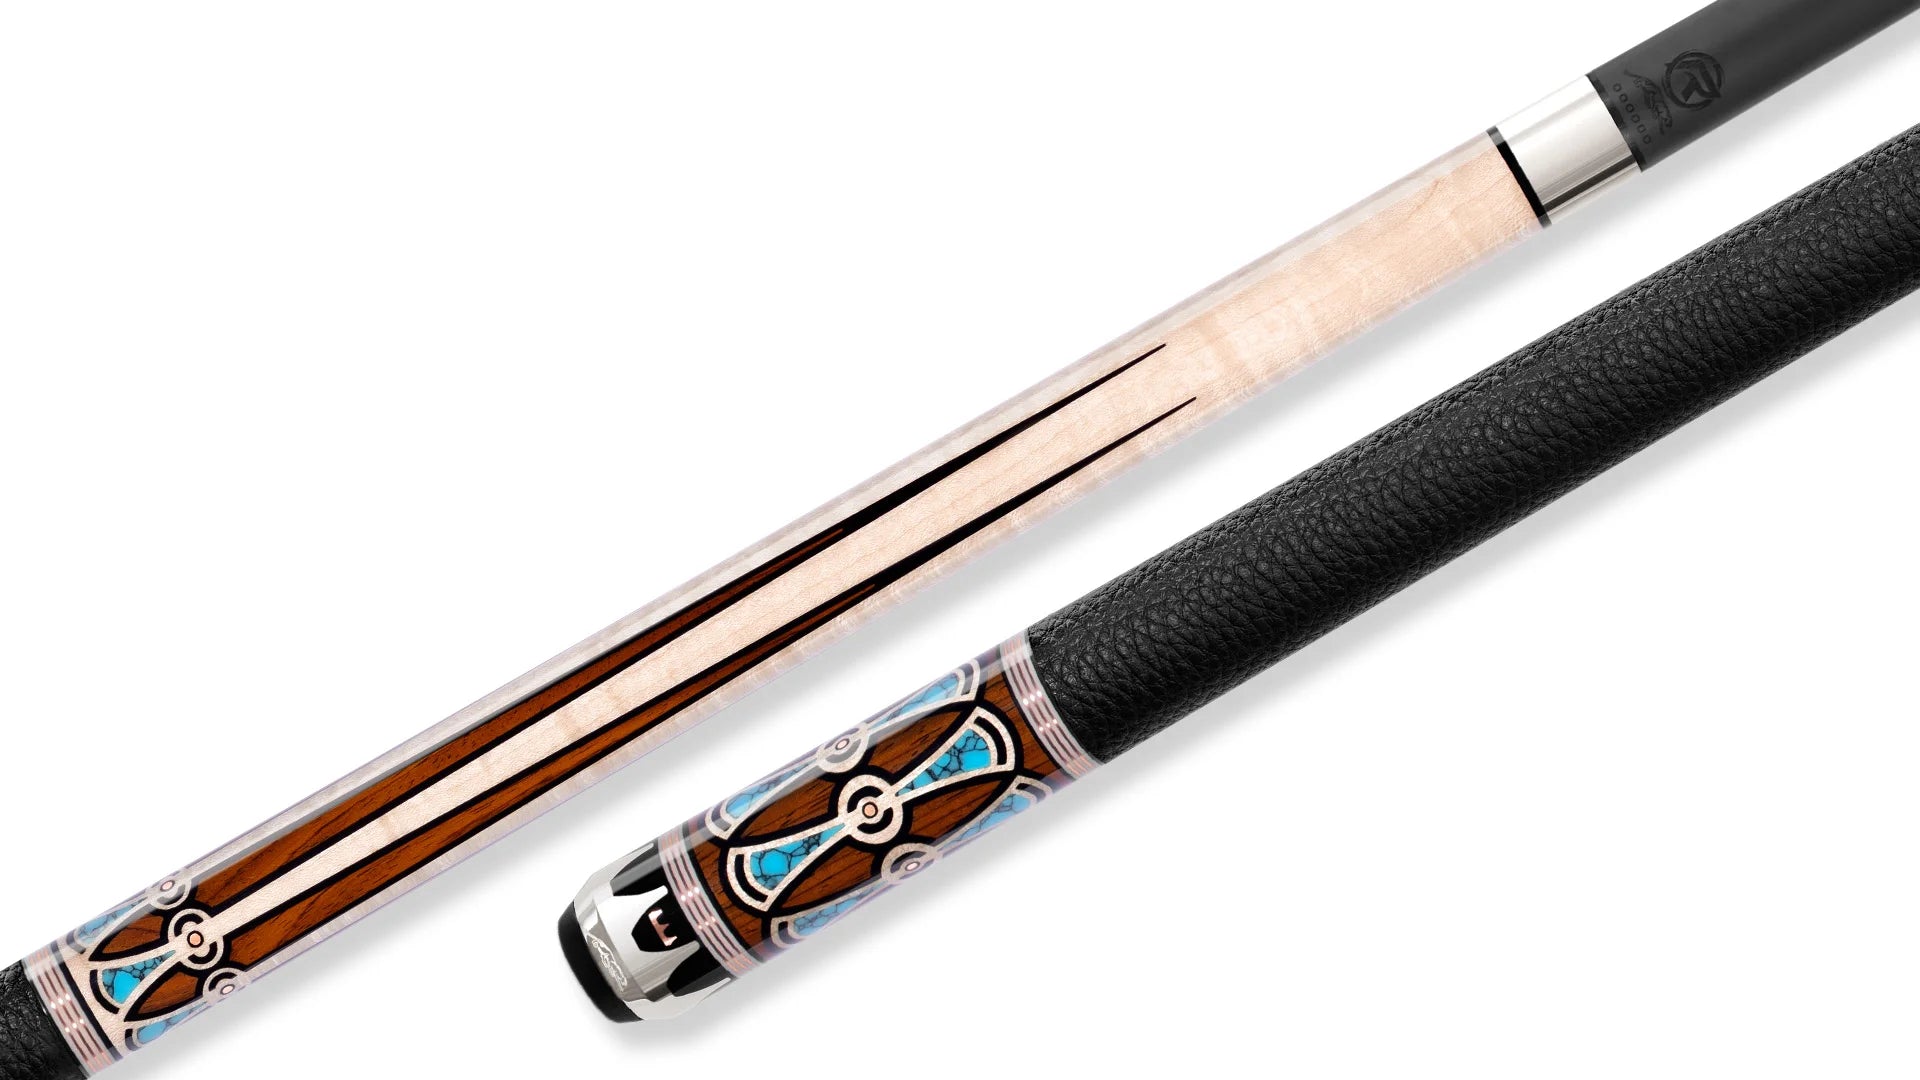 PREDATOR THRONE 3 2 POOL CUE (SHAFT NOT INCLUDED)